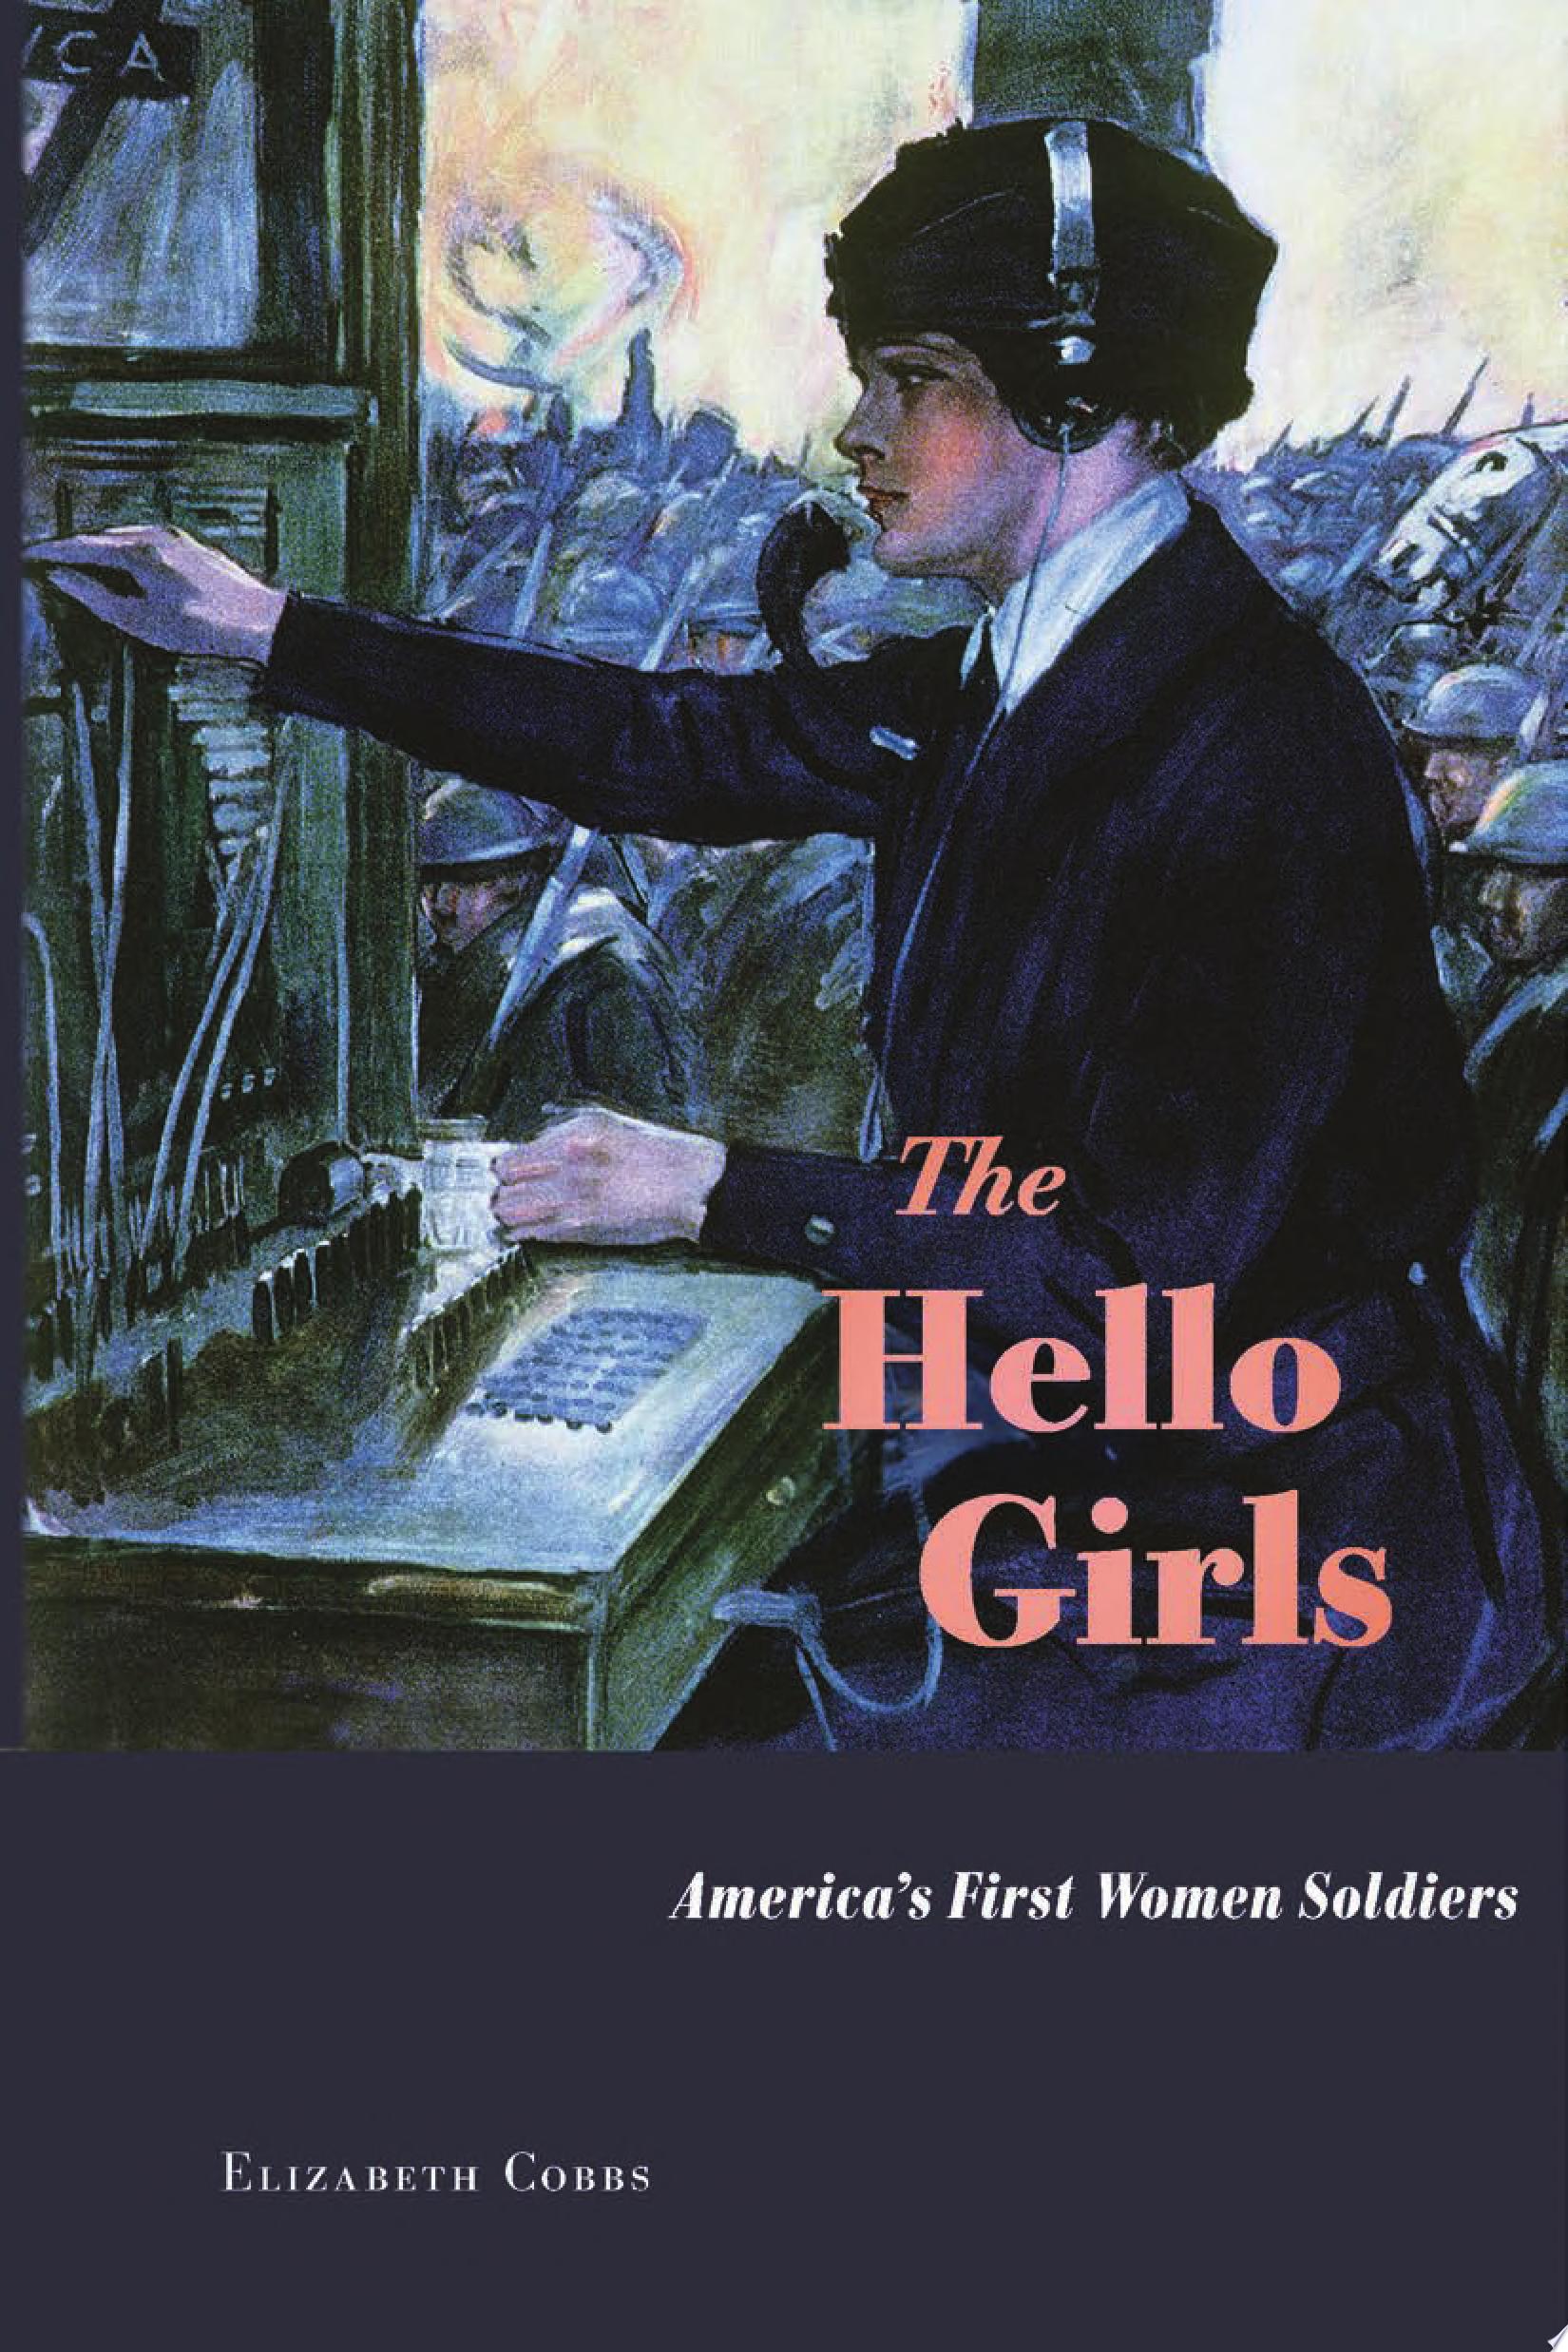 Image for "The Hello Girls"